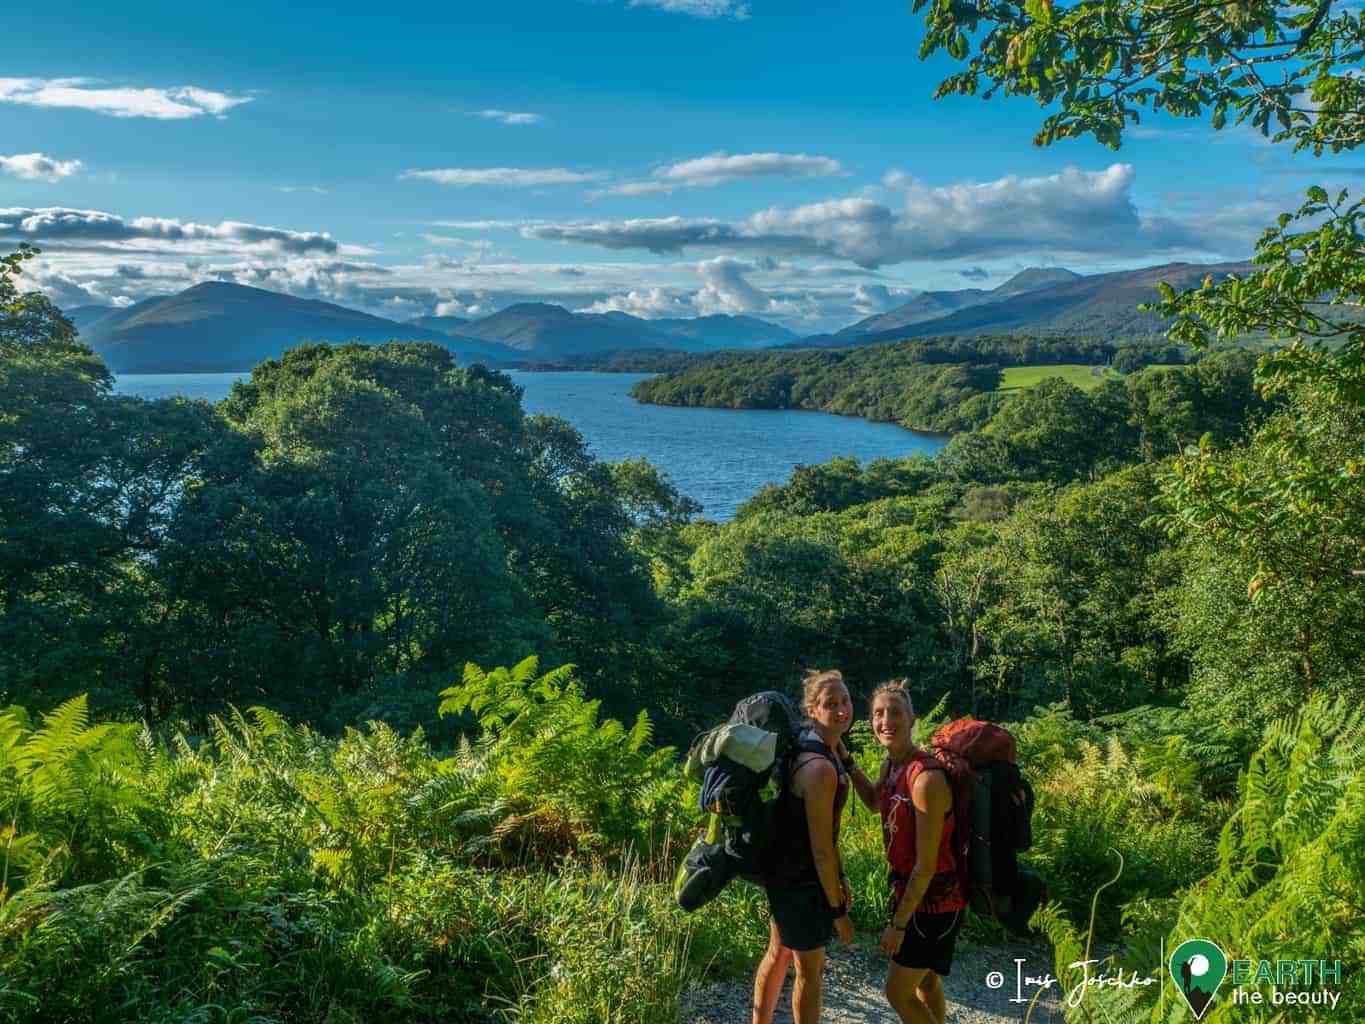 two girls hiking at a lake (loch lomond) on a beautiful sunny day